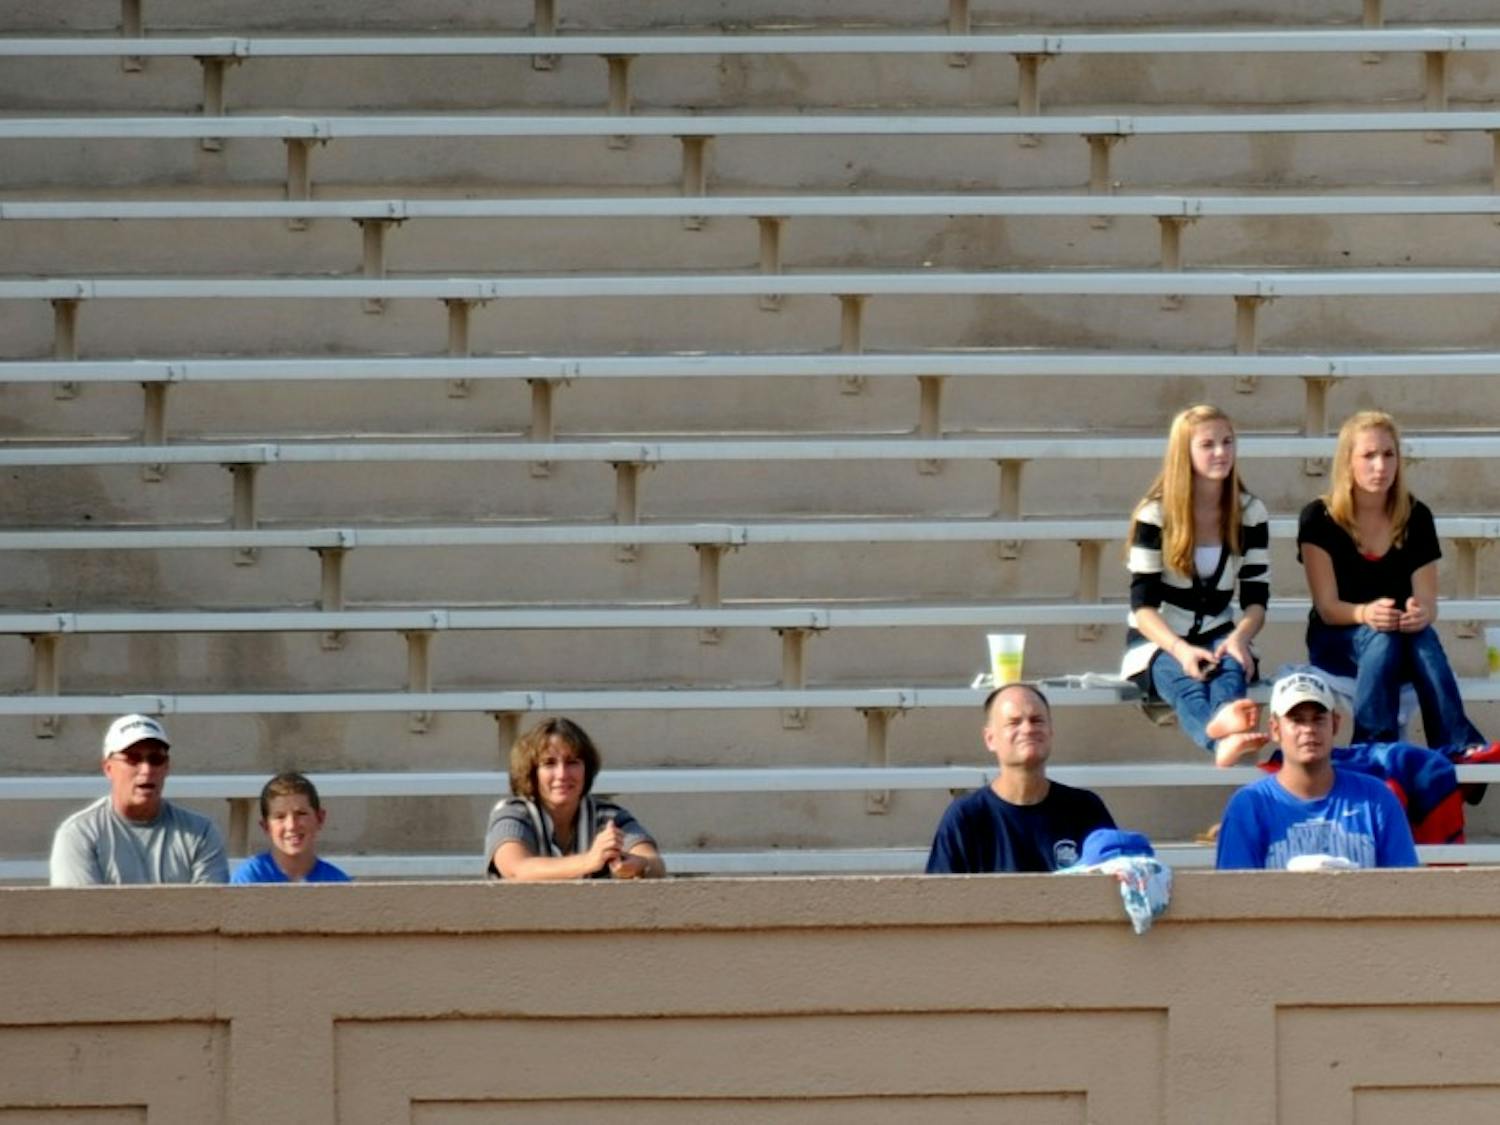 A drop in attendance at Wallace Wade Stadium has prompted Duke’s athletic department to forego its original plan to close the stadium’s bowl.